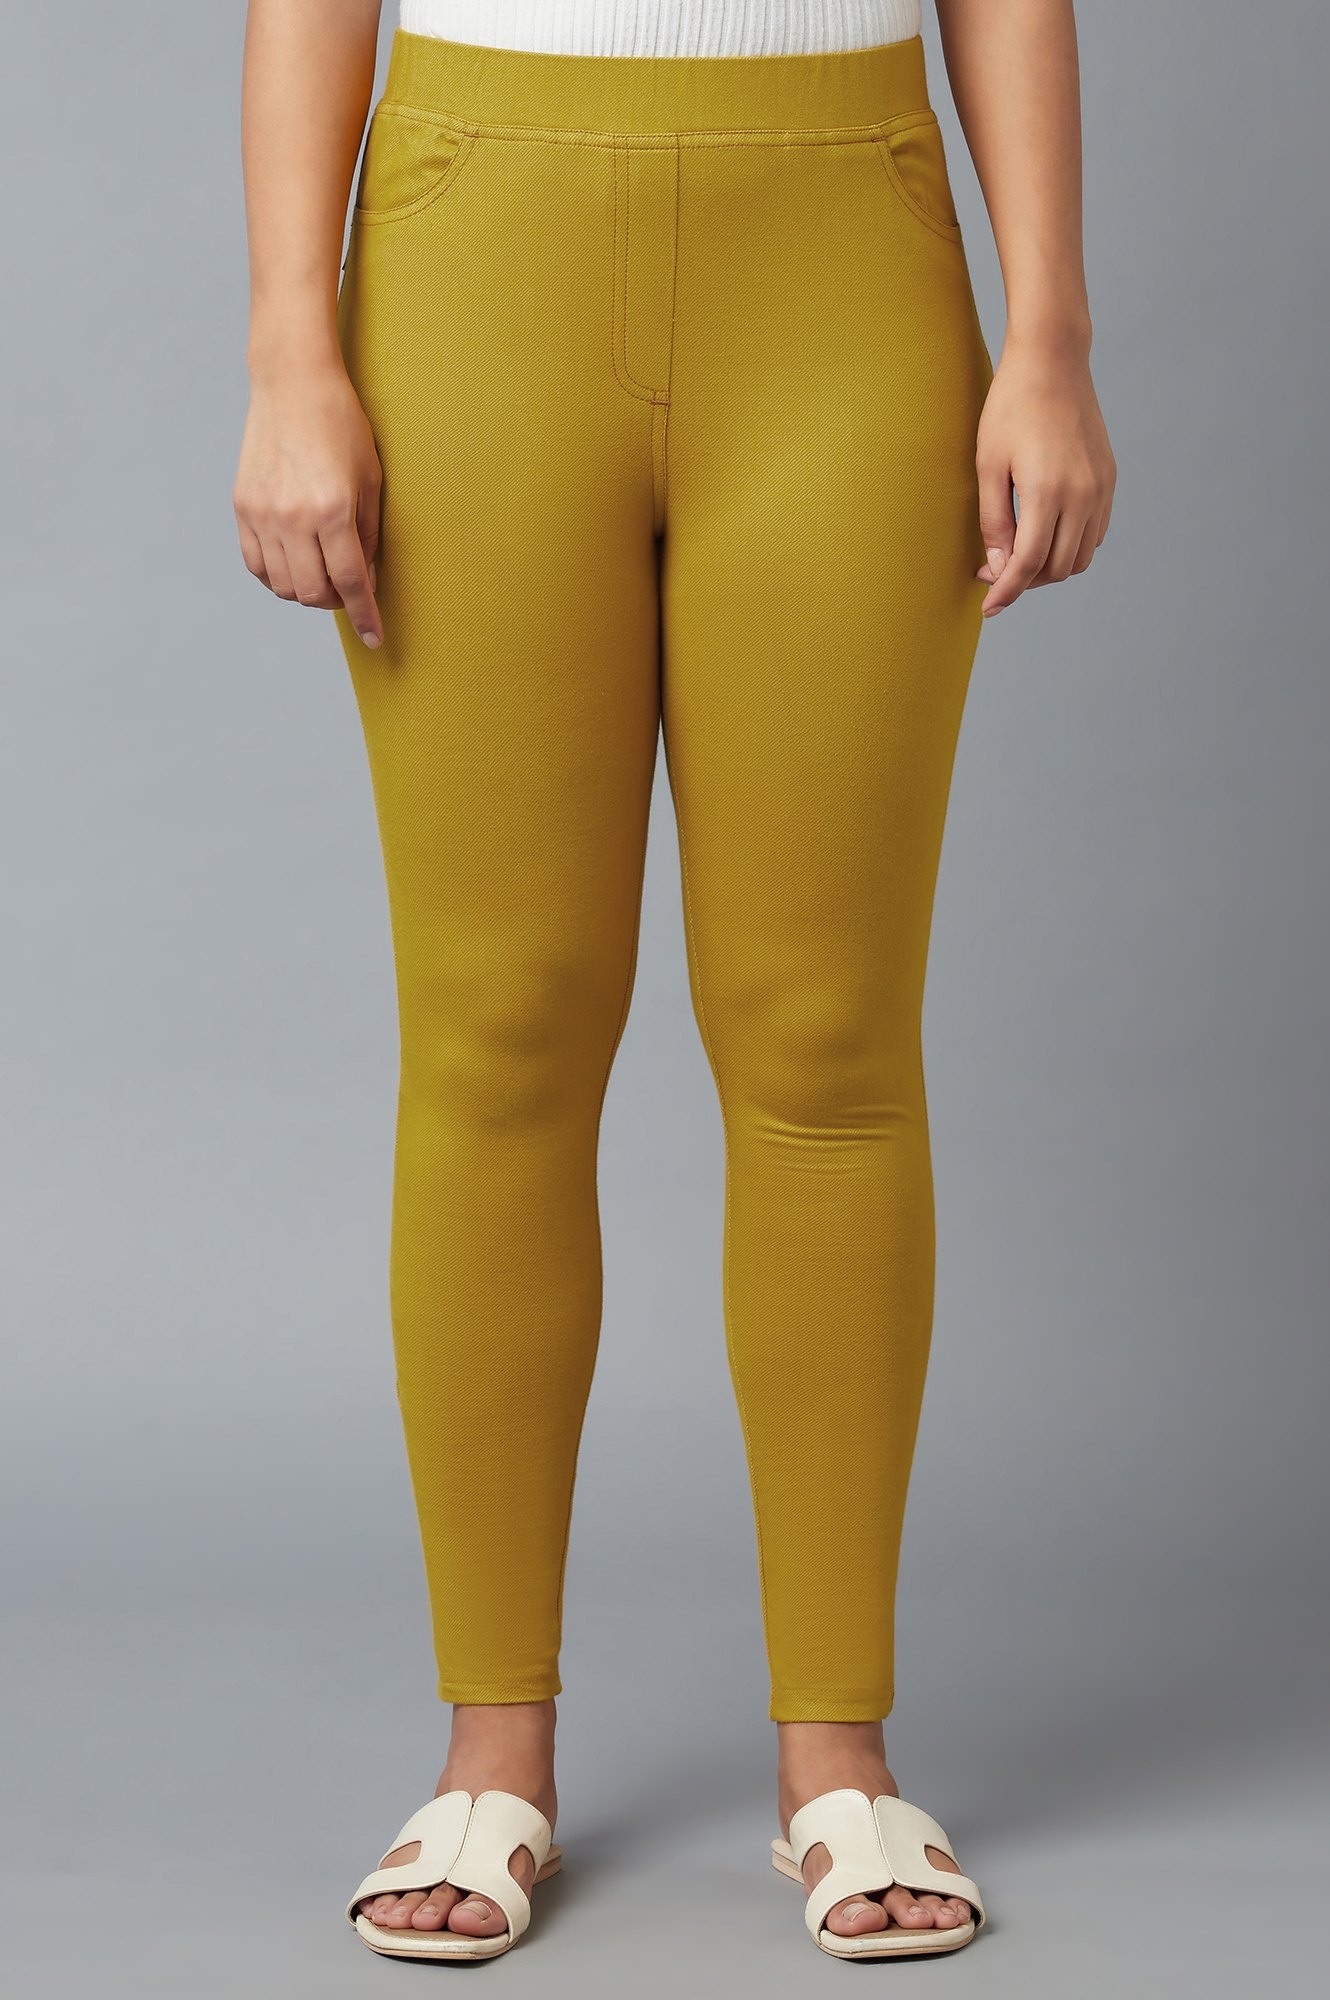 Elleven | Yellow Yarn-Dyed Knitted Jeggings 0